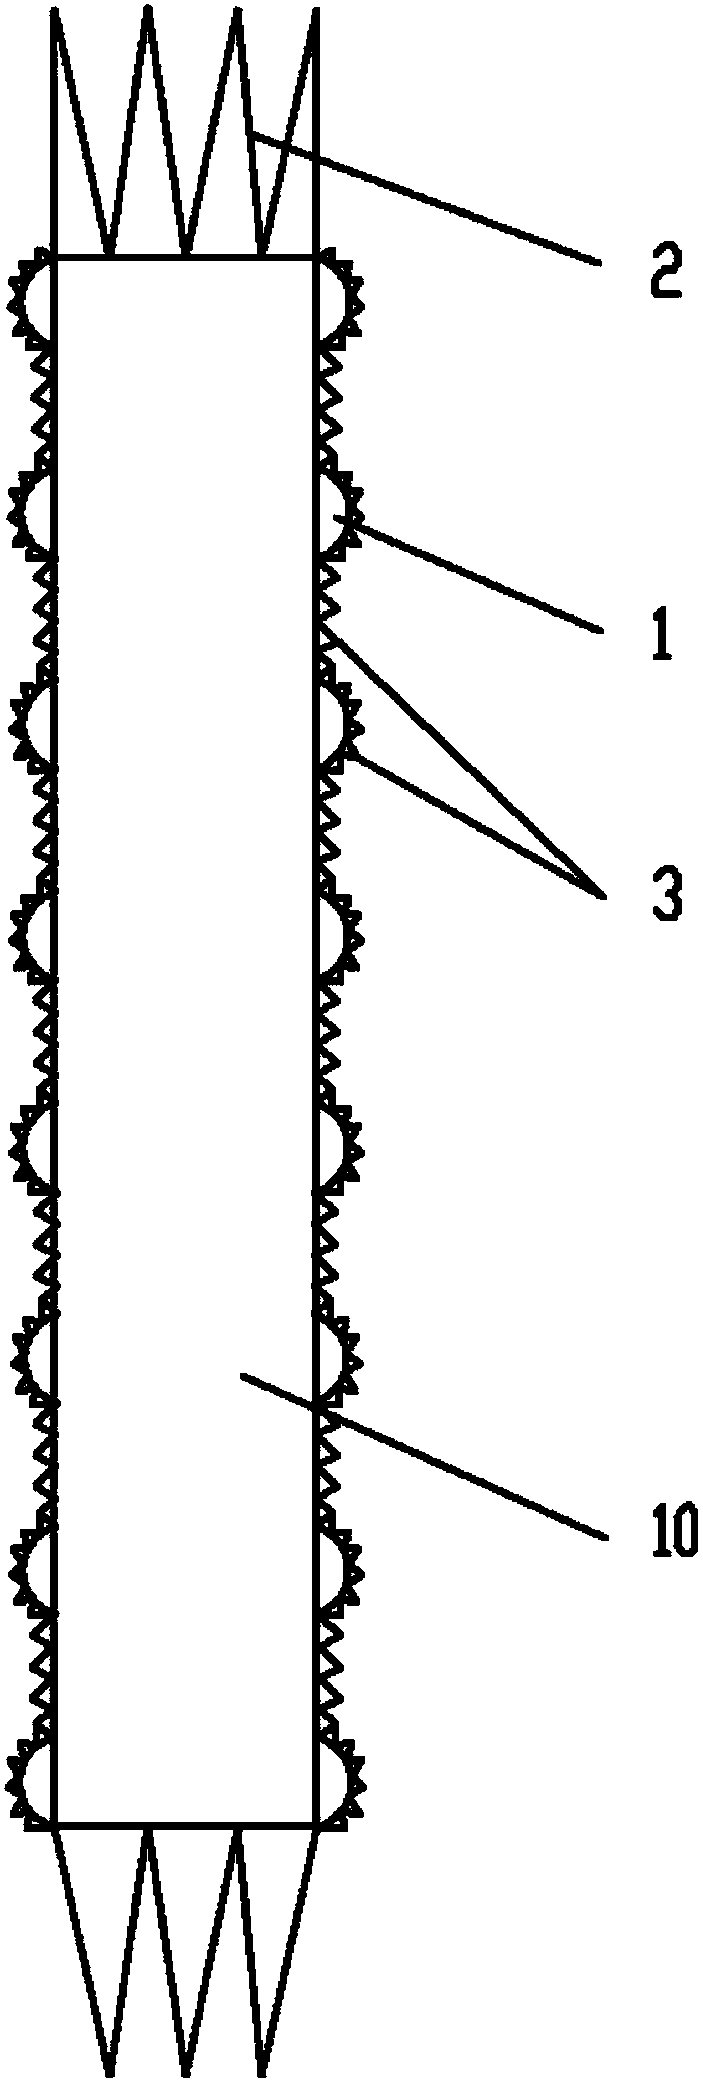 Biomass-energy sludge fuel rod for enhancing energy recovery